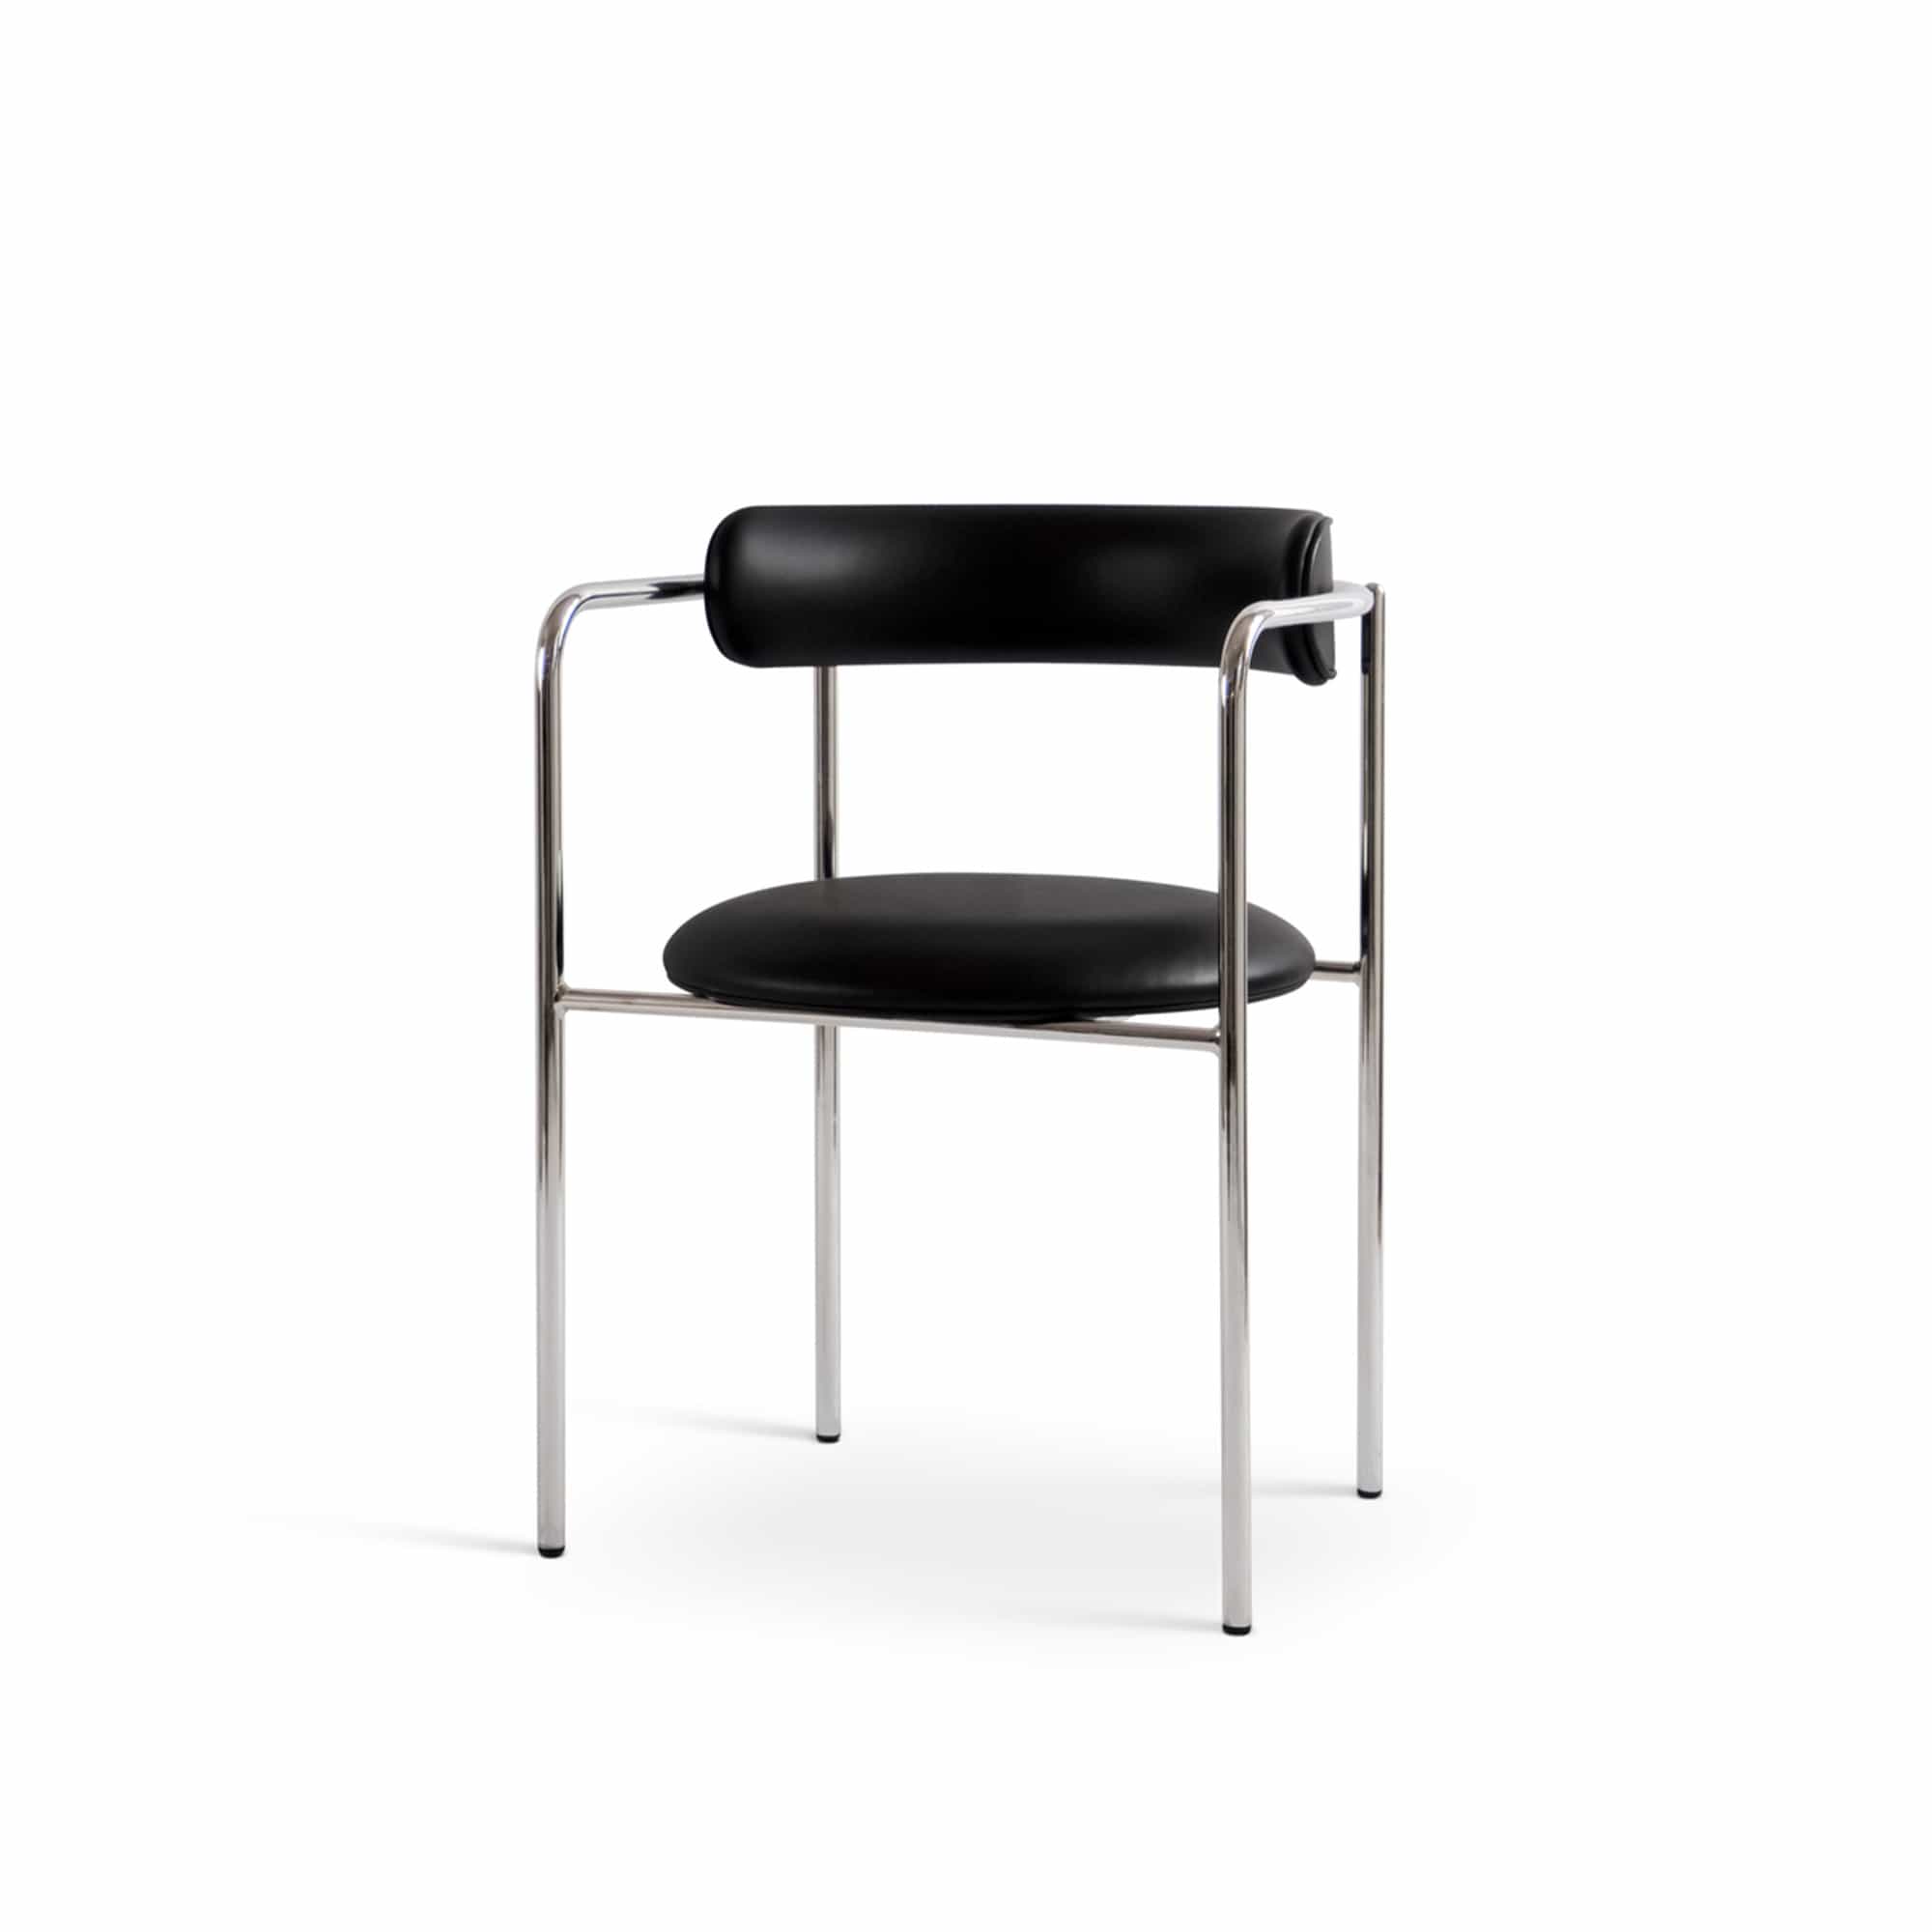 FF Chair Rounded Chrome Legs